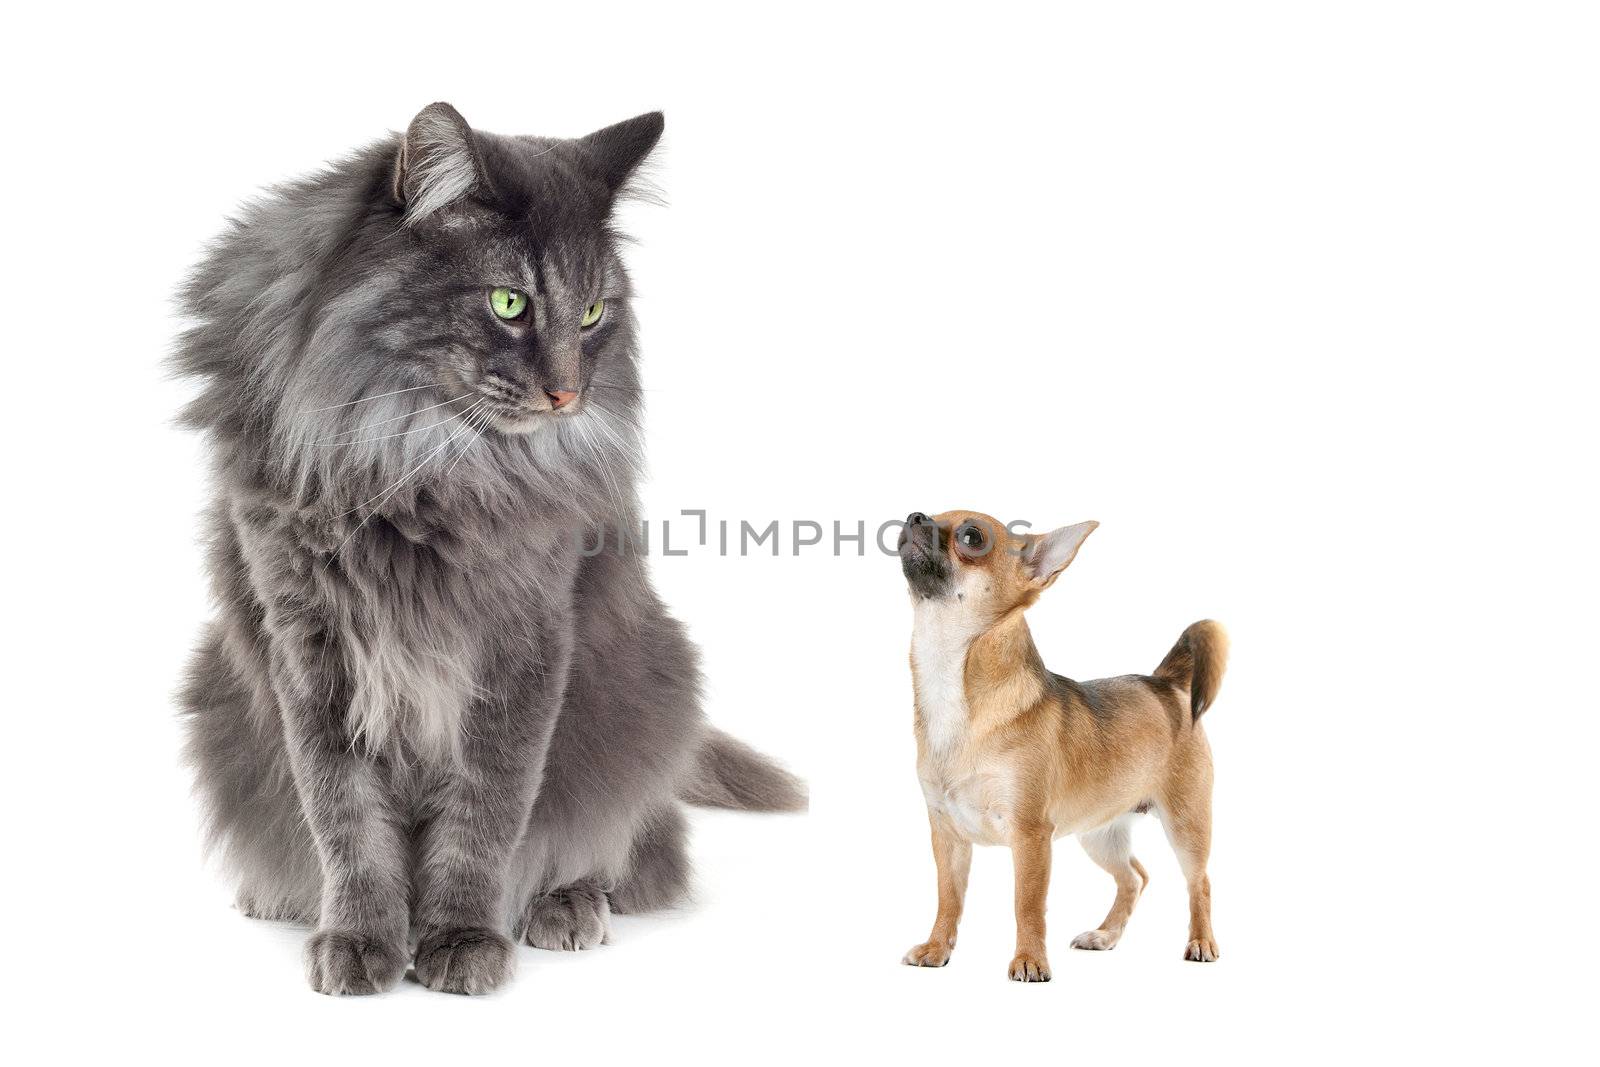 Norwegian Forest Cat and a Chihuahua dog by eriklam